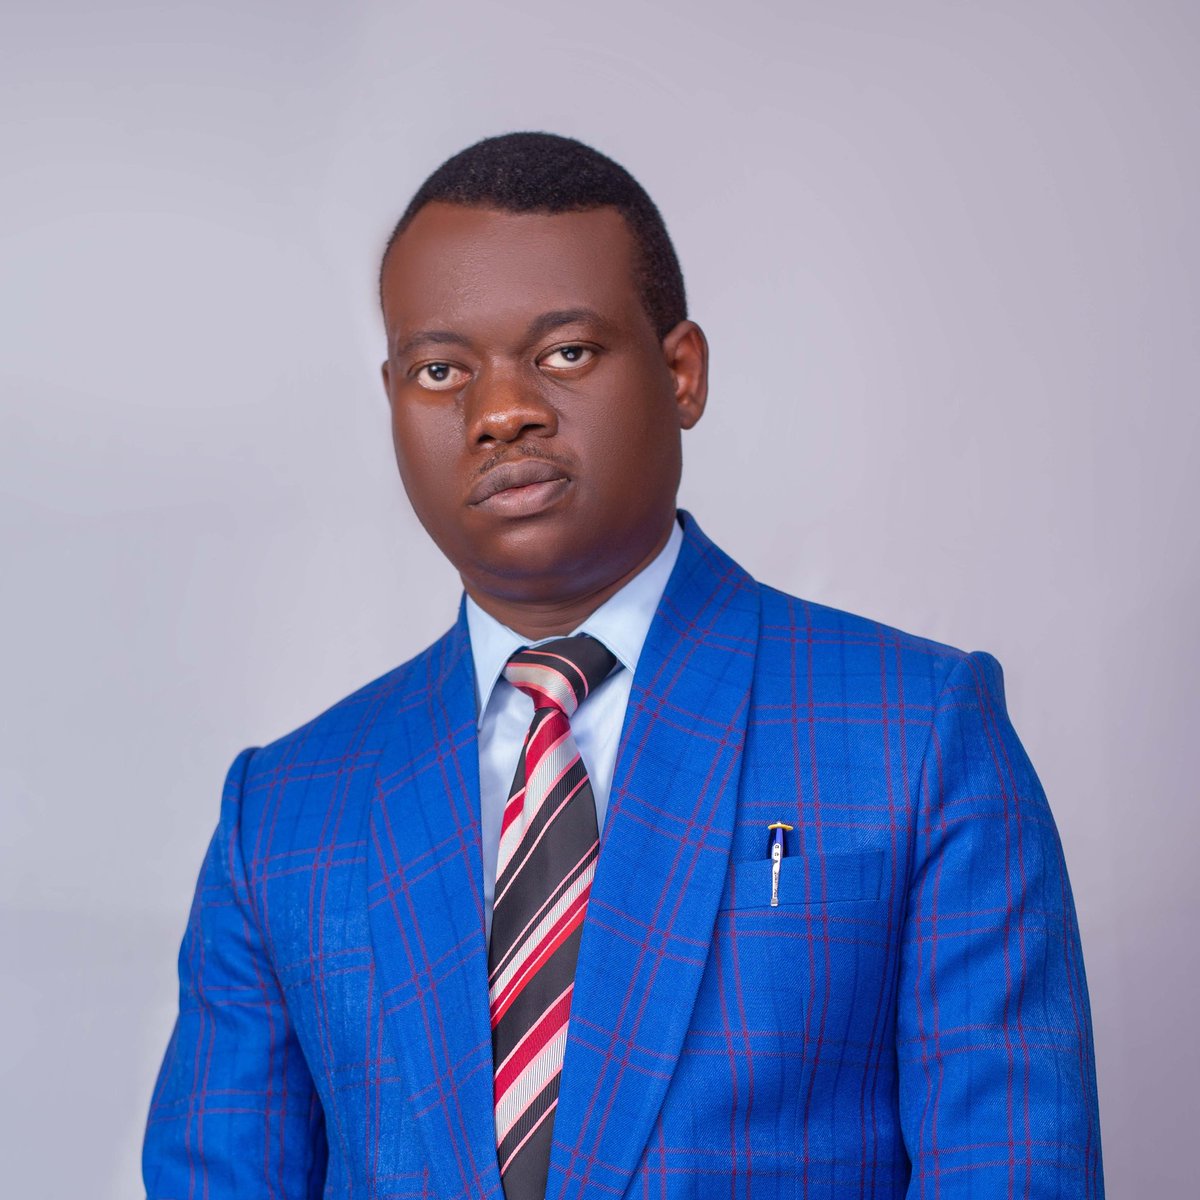 Download MP3 | All Apostle Arome Osayi 2022 Messages - January Till Date